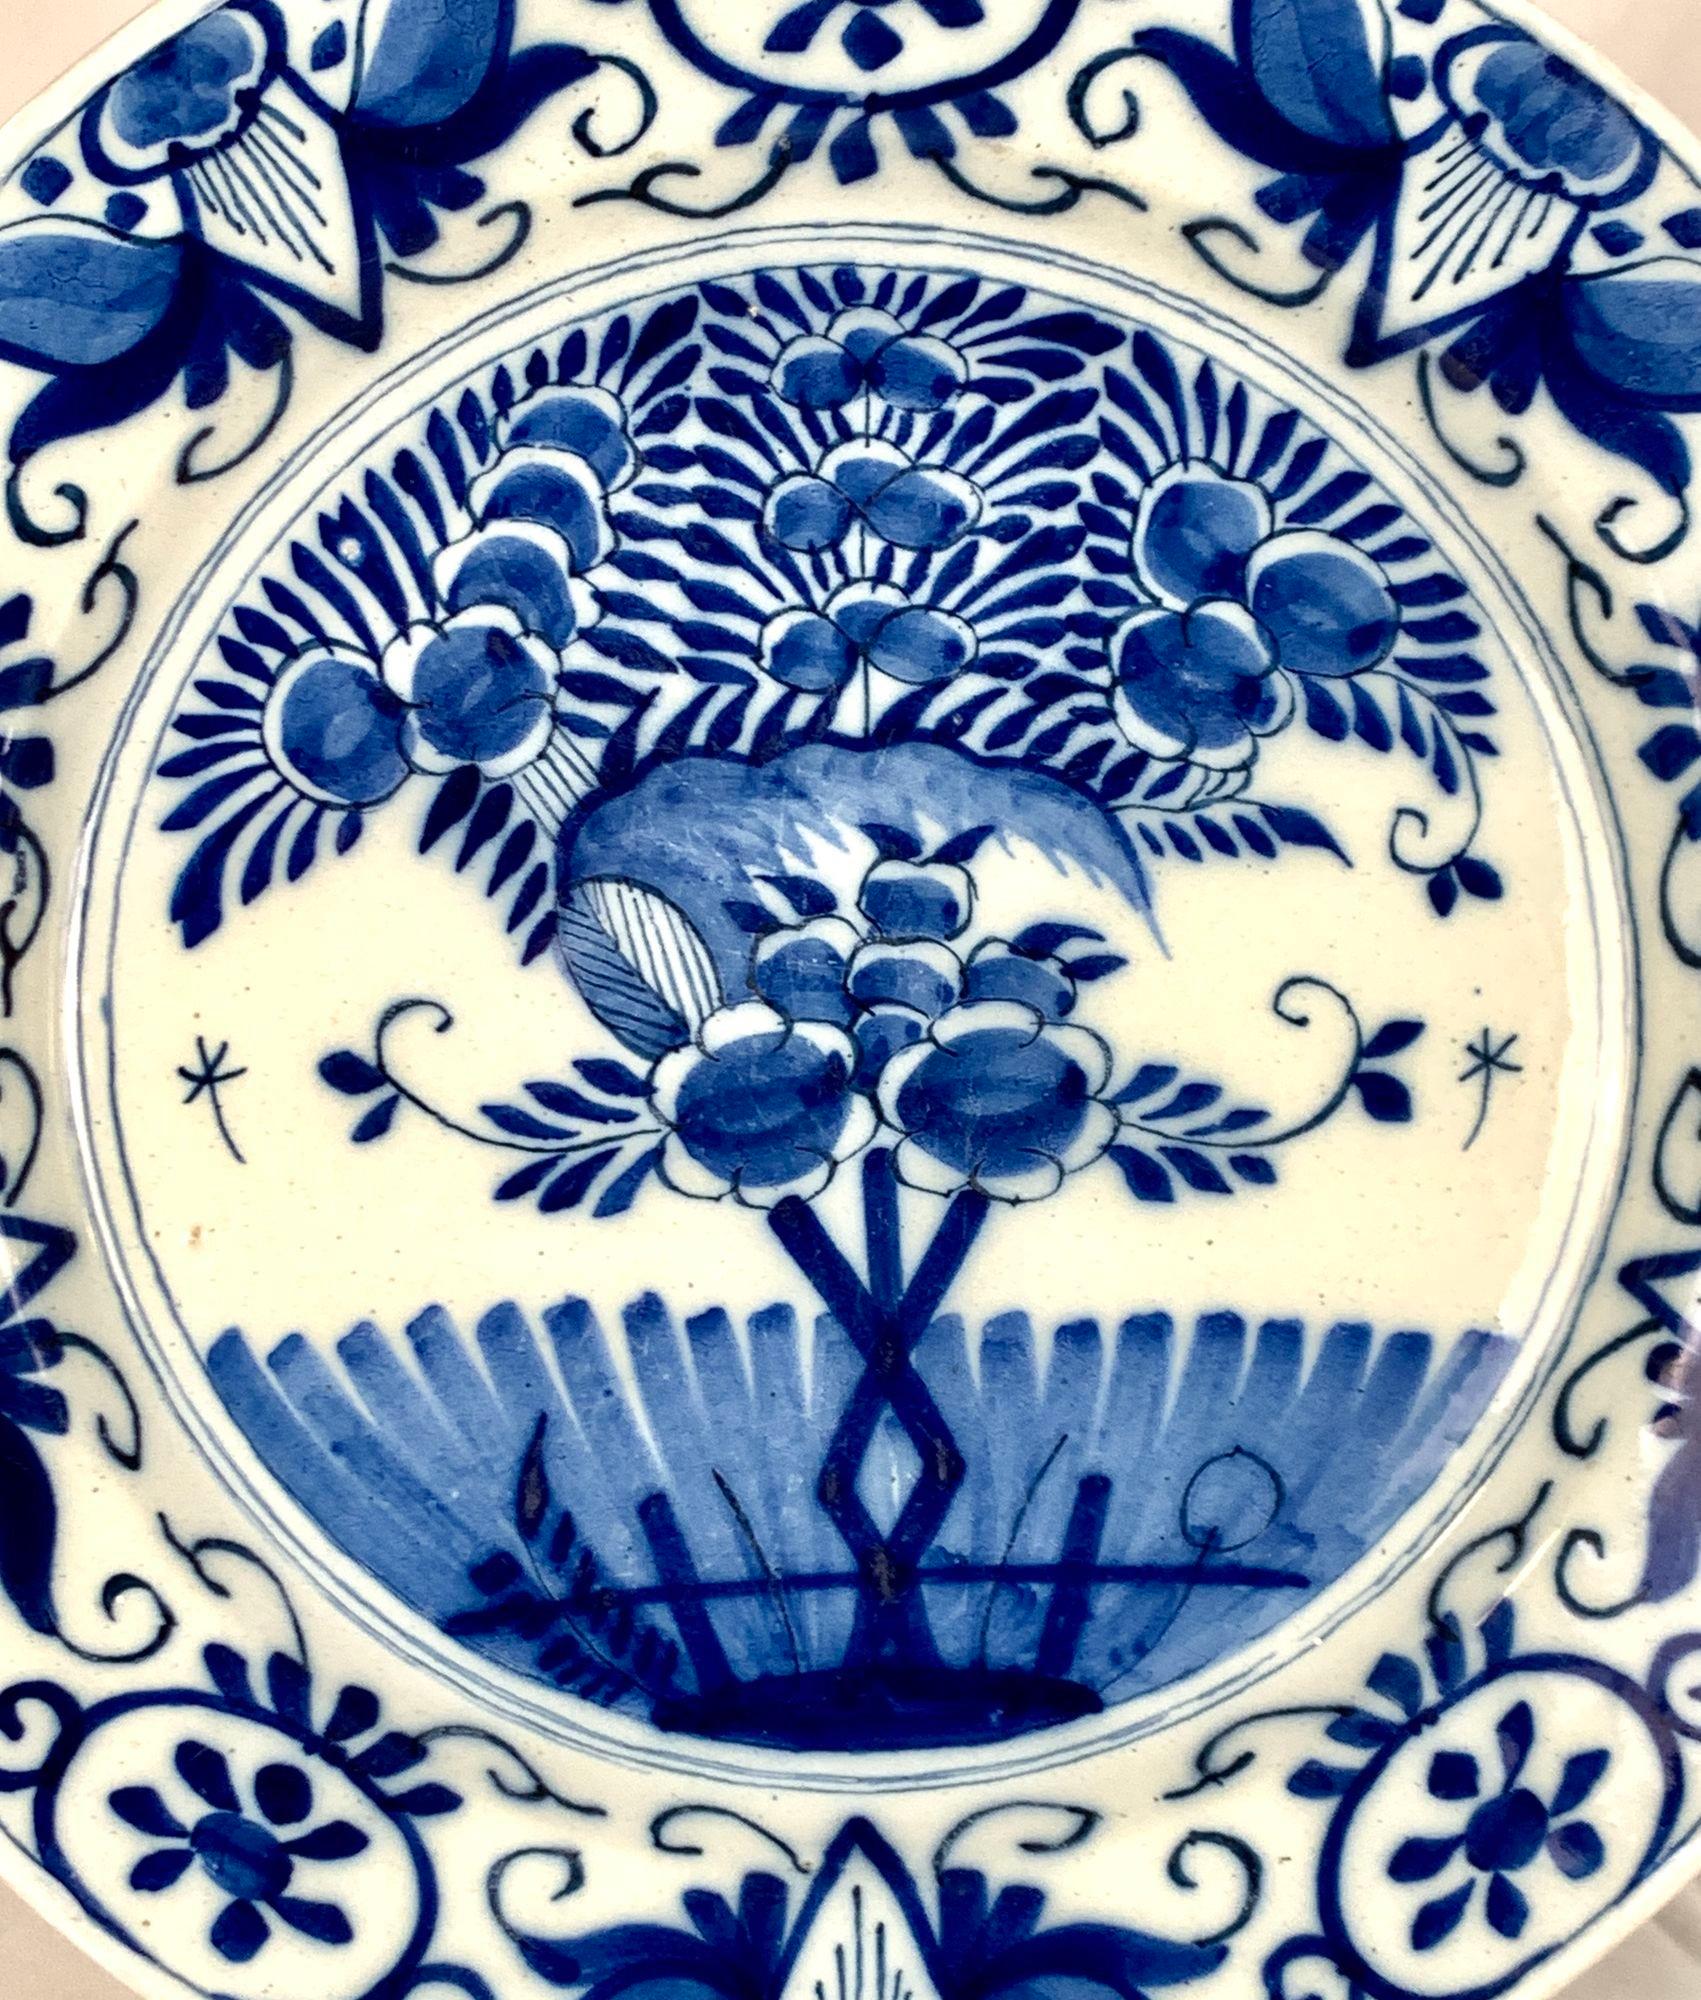 This lovely blue and white Delft charger was made in the Netherlands around 1780.
It was meticulously hand-painted in two shades of cobalt blue on a white tin-glazed surface.
The center of the charger portrays a beautiful garden scene, with a